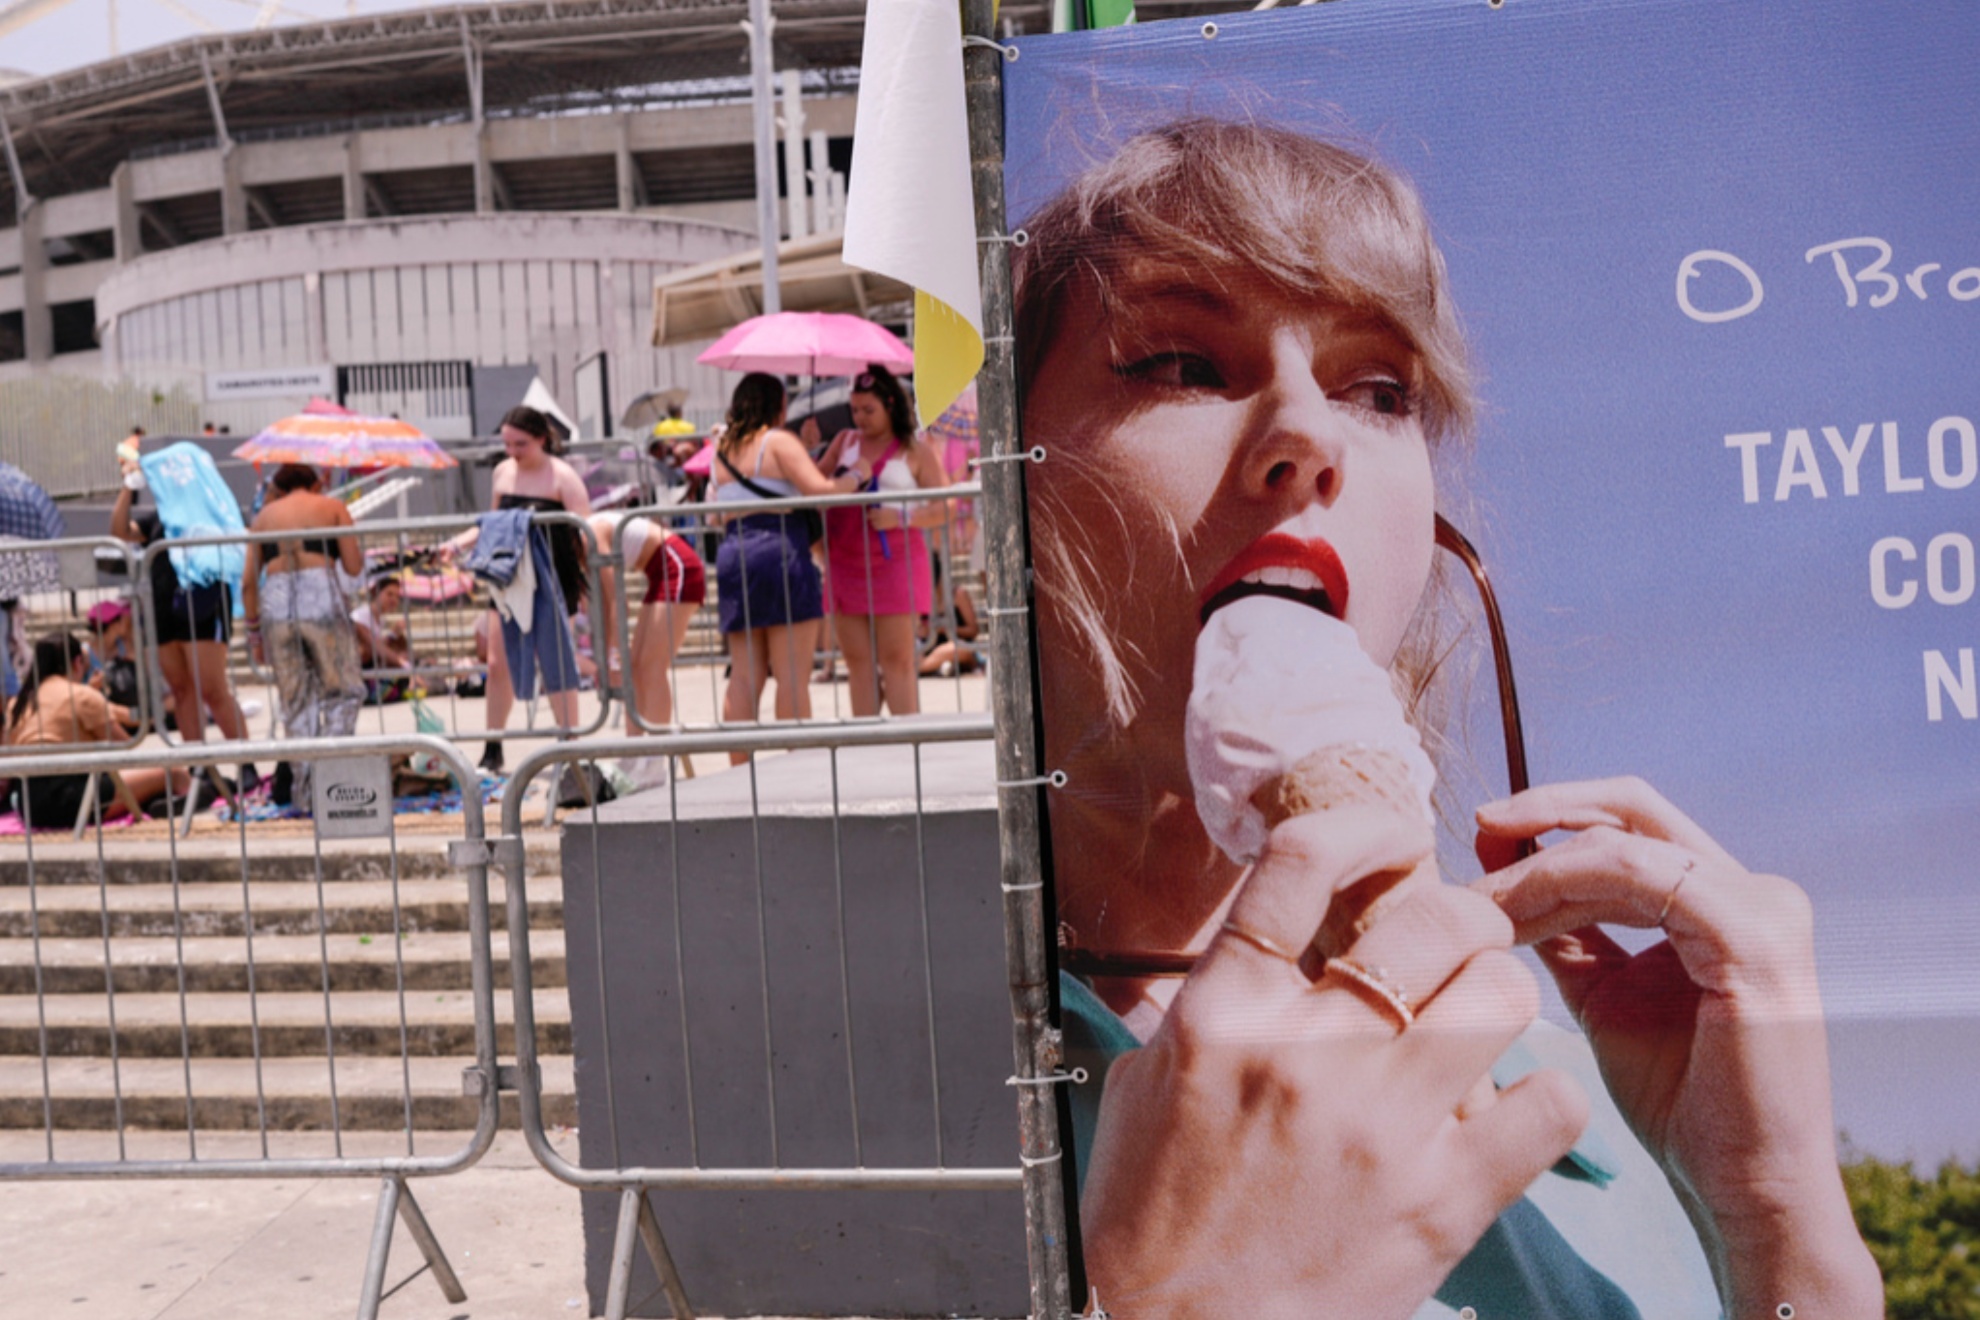 Fans take shelter from the high temperatures during Taylor Swift's concert in Brazil.